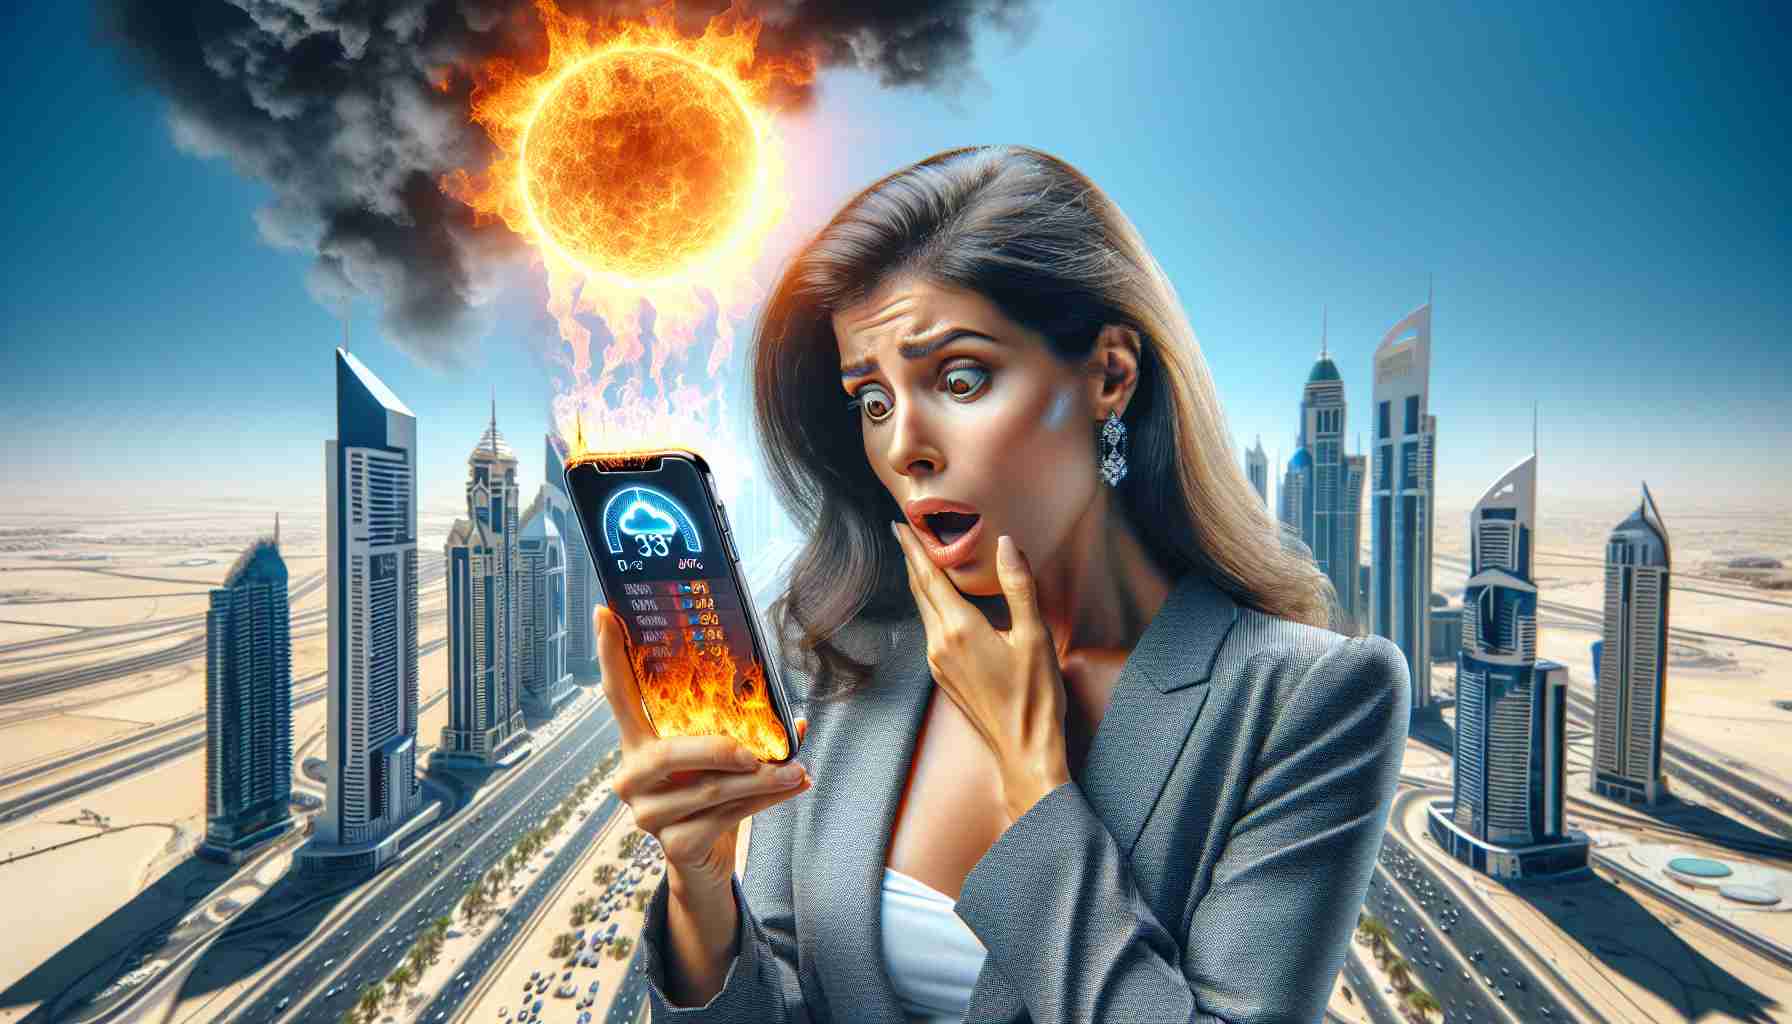 Dubai’s Sweltering Climate Renders Tech CEO’s Phone Defunct